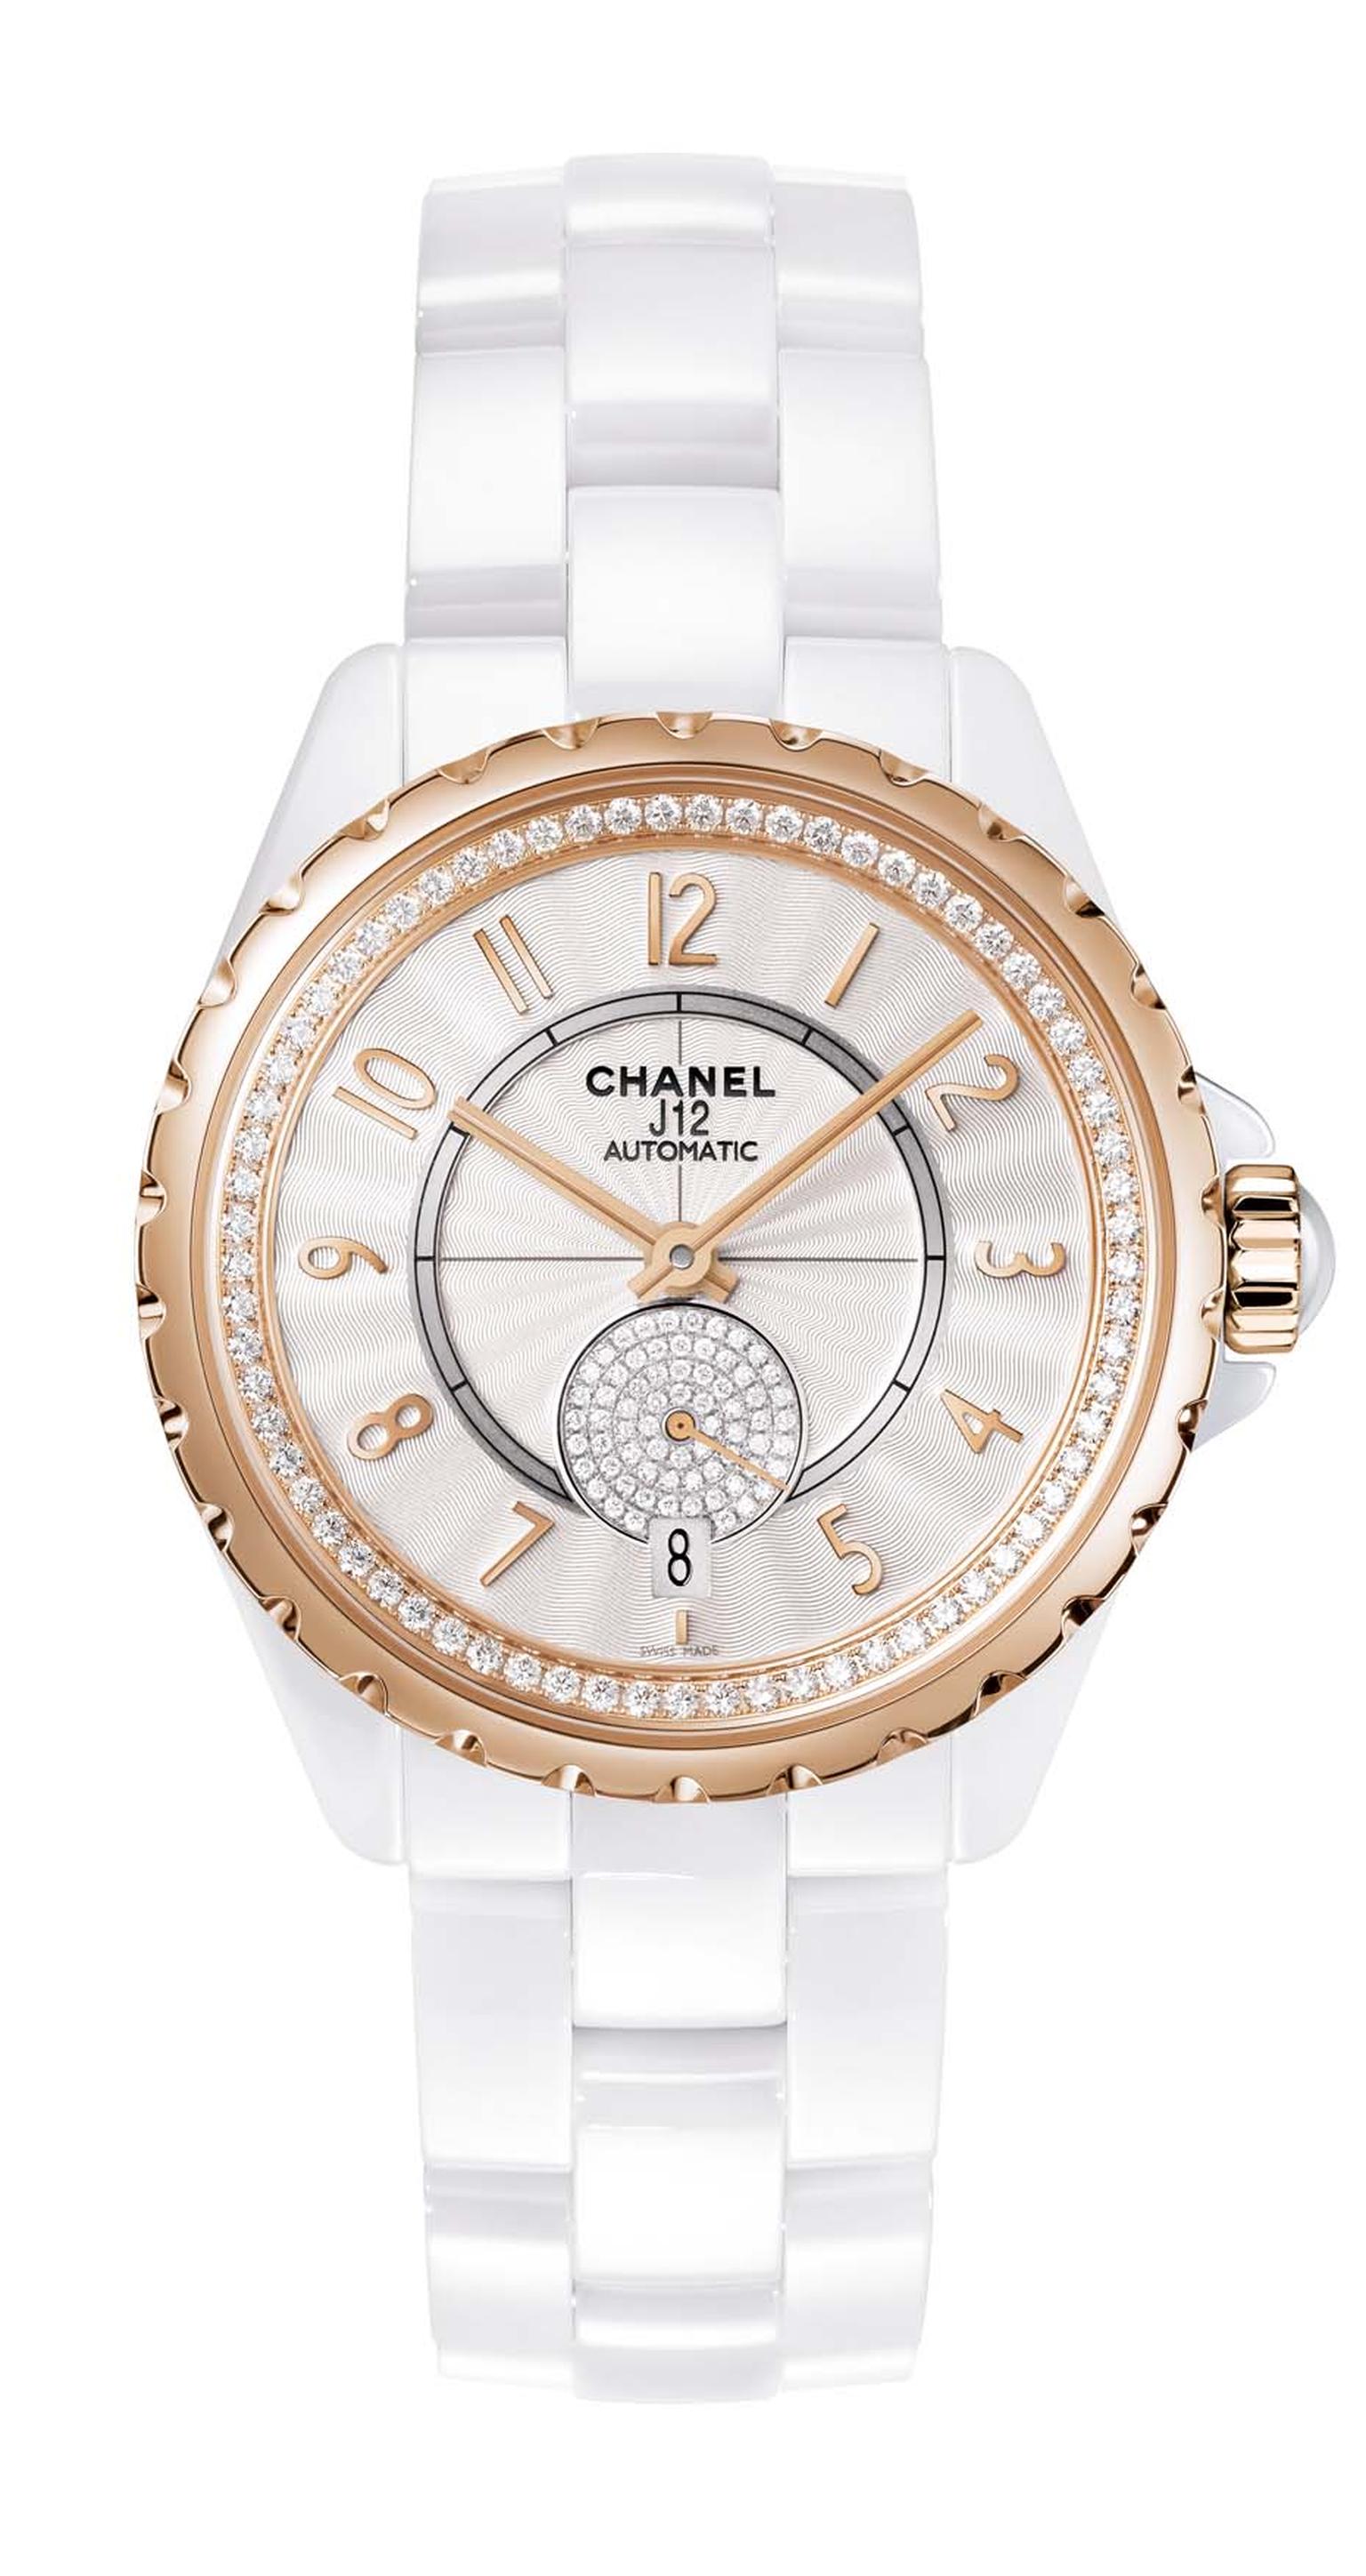 Chanel J12-365 white high-tech ceramic watch featuring beige gold, an alloy exclusive to Chanel as well as a Guilloche´-finished white dial and diamonds within the inner bezel and small seconds.